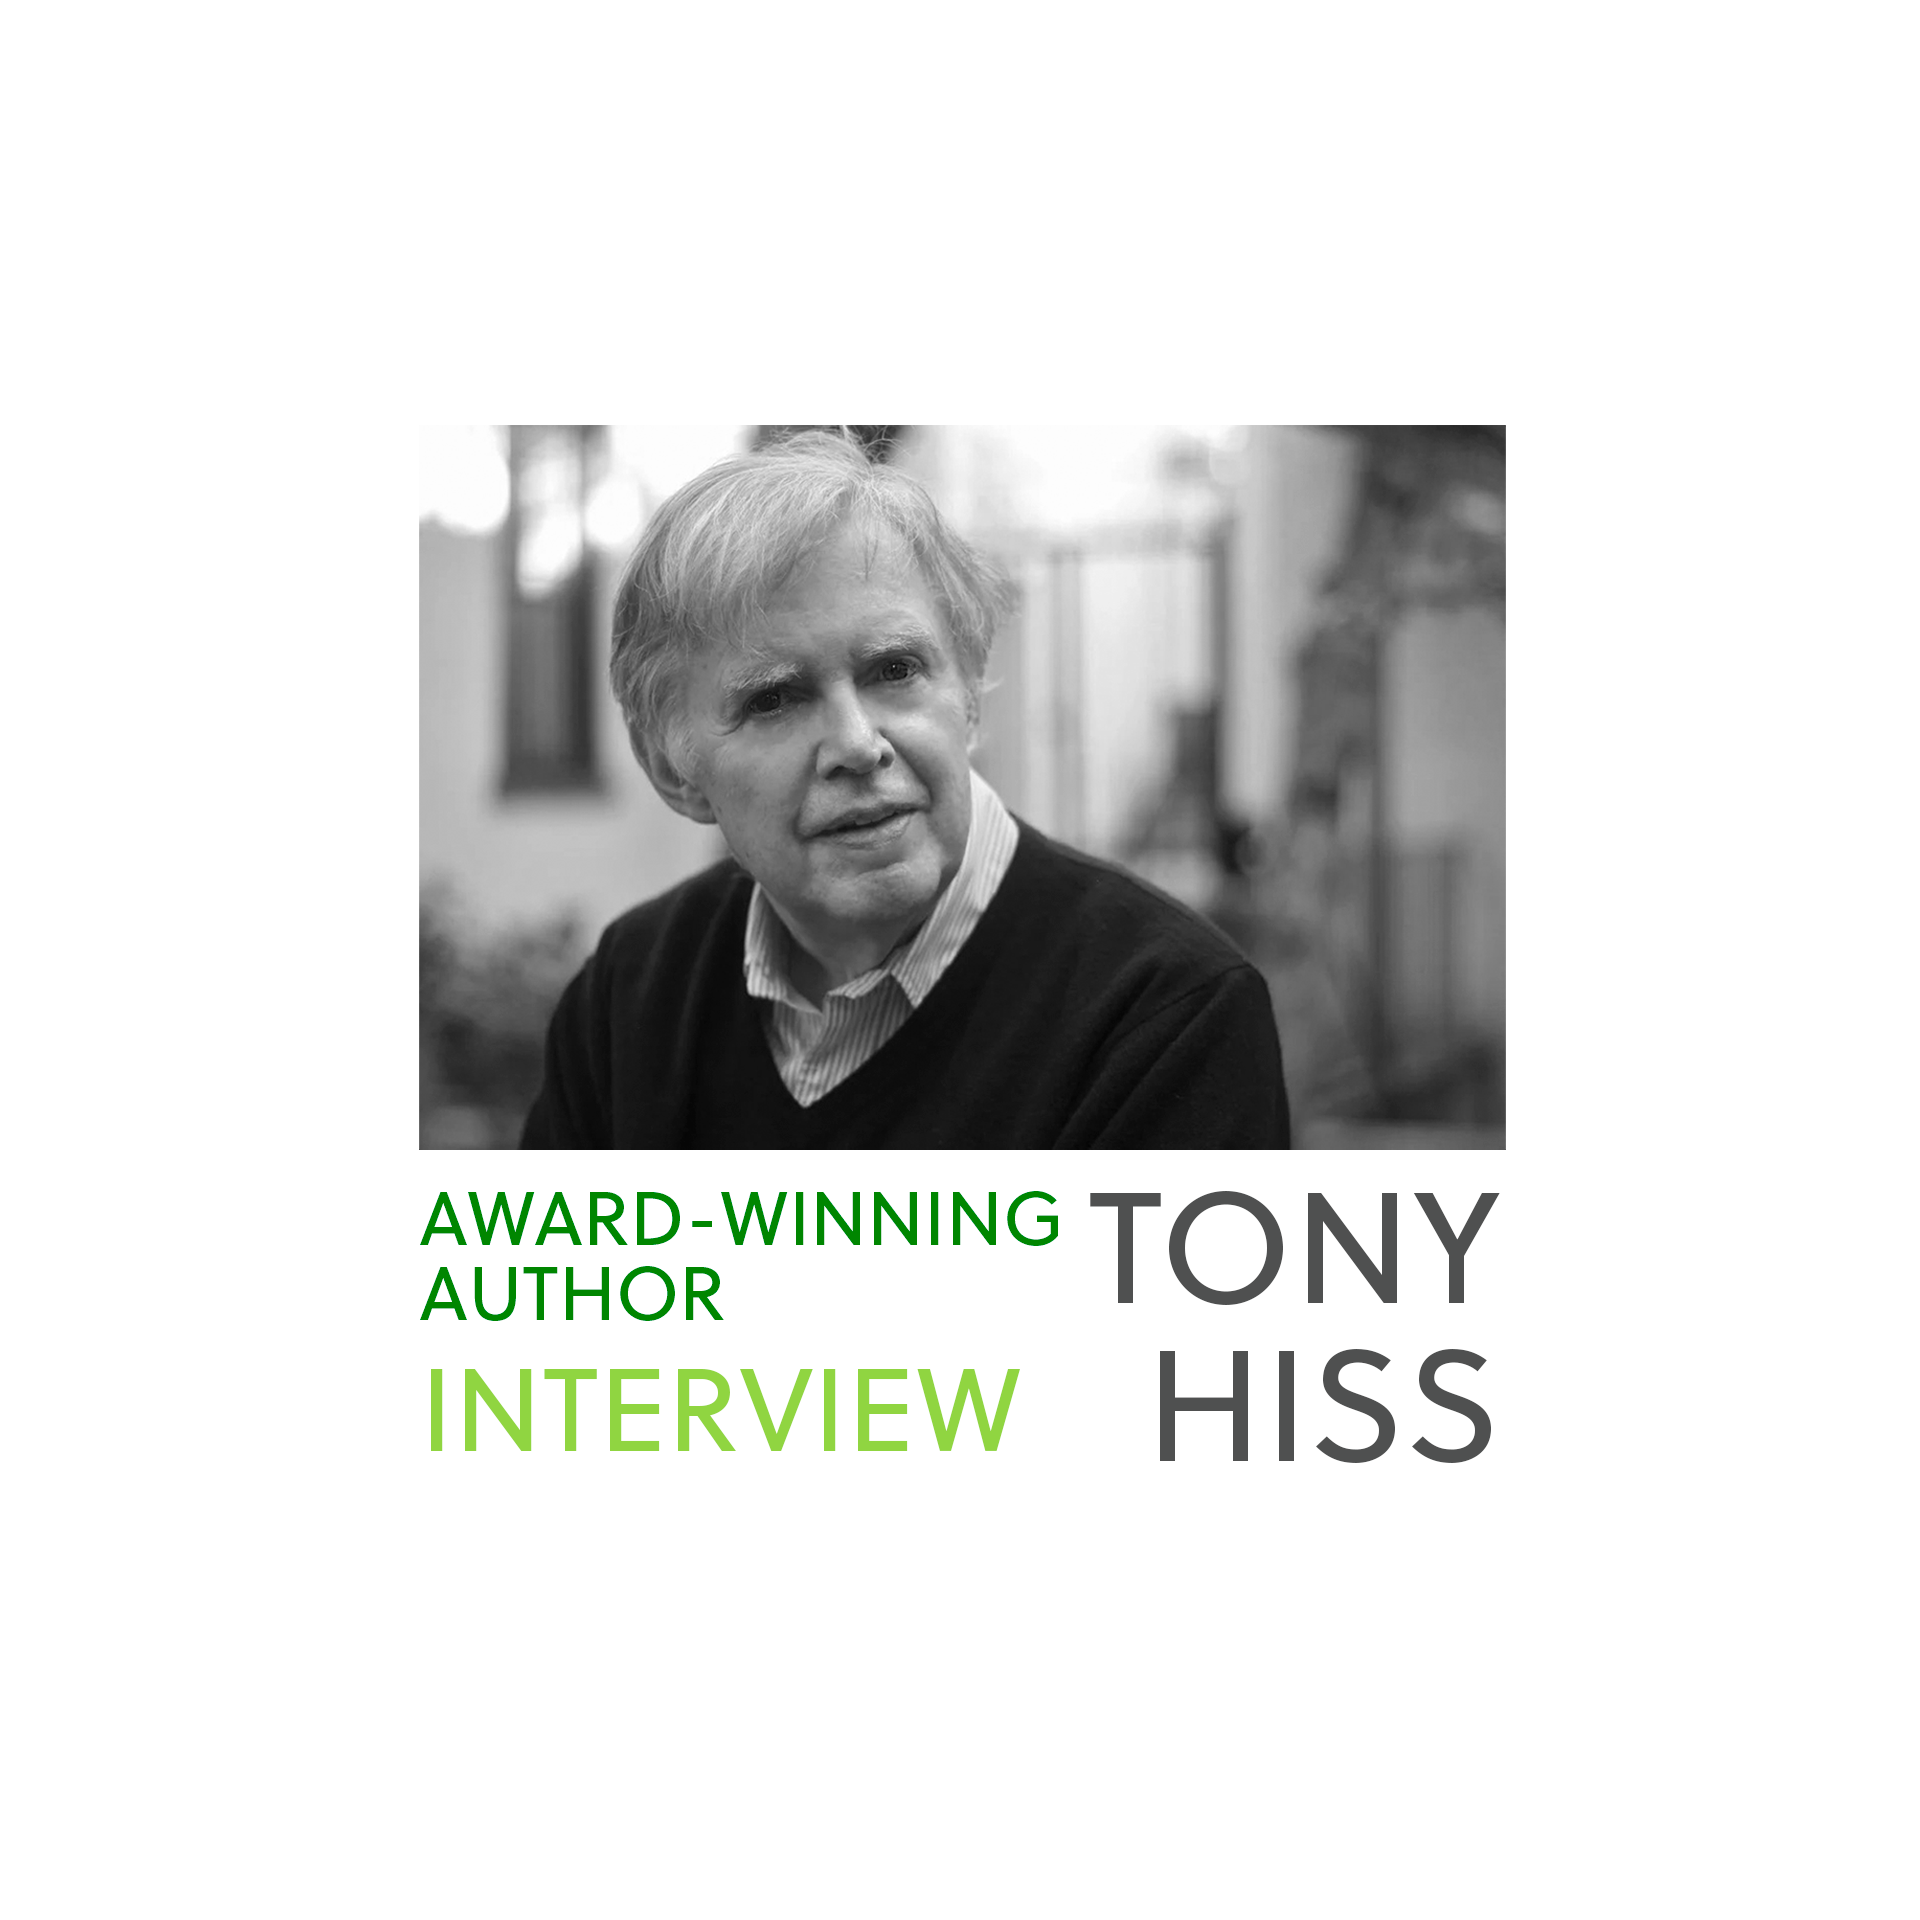 Tony Hiss: "Behind This is My Earth there’s a beautiful and powerful idea: We all depend on each other to overcome adversity"